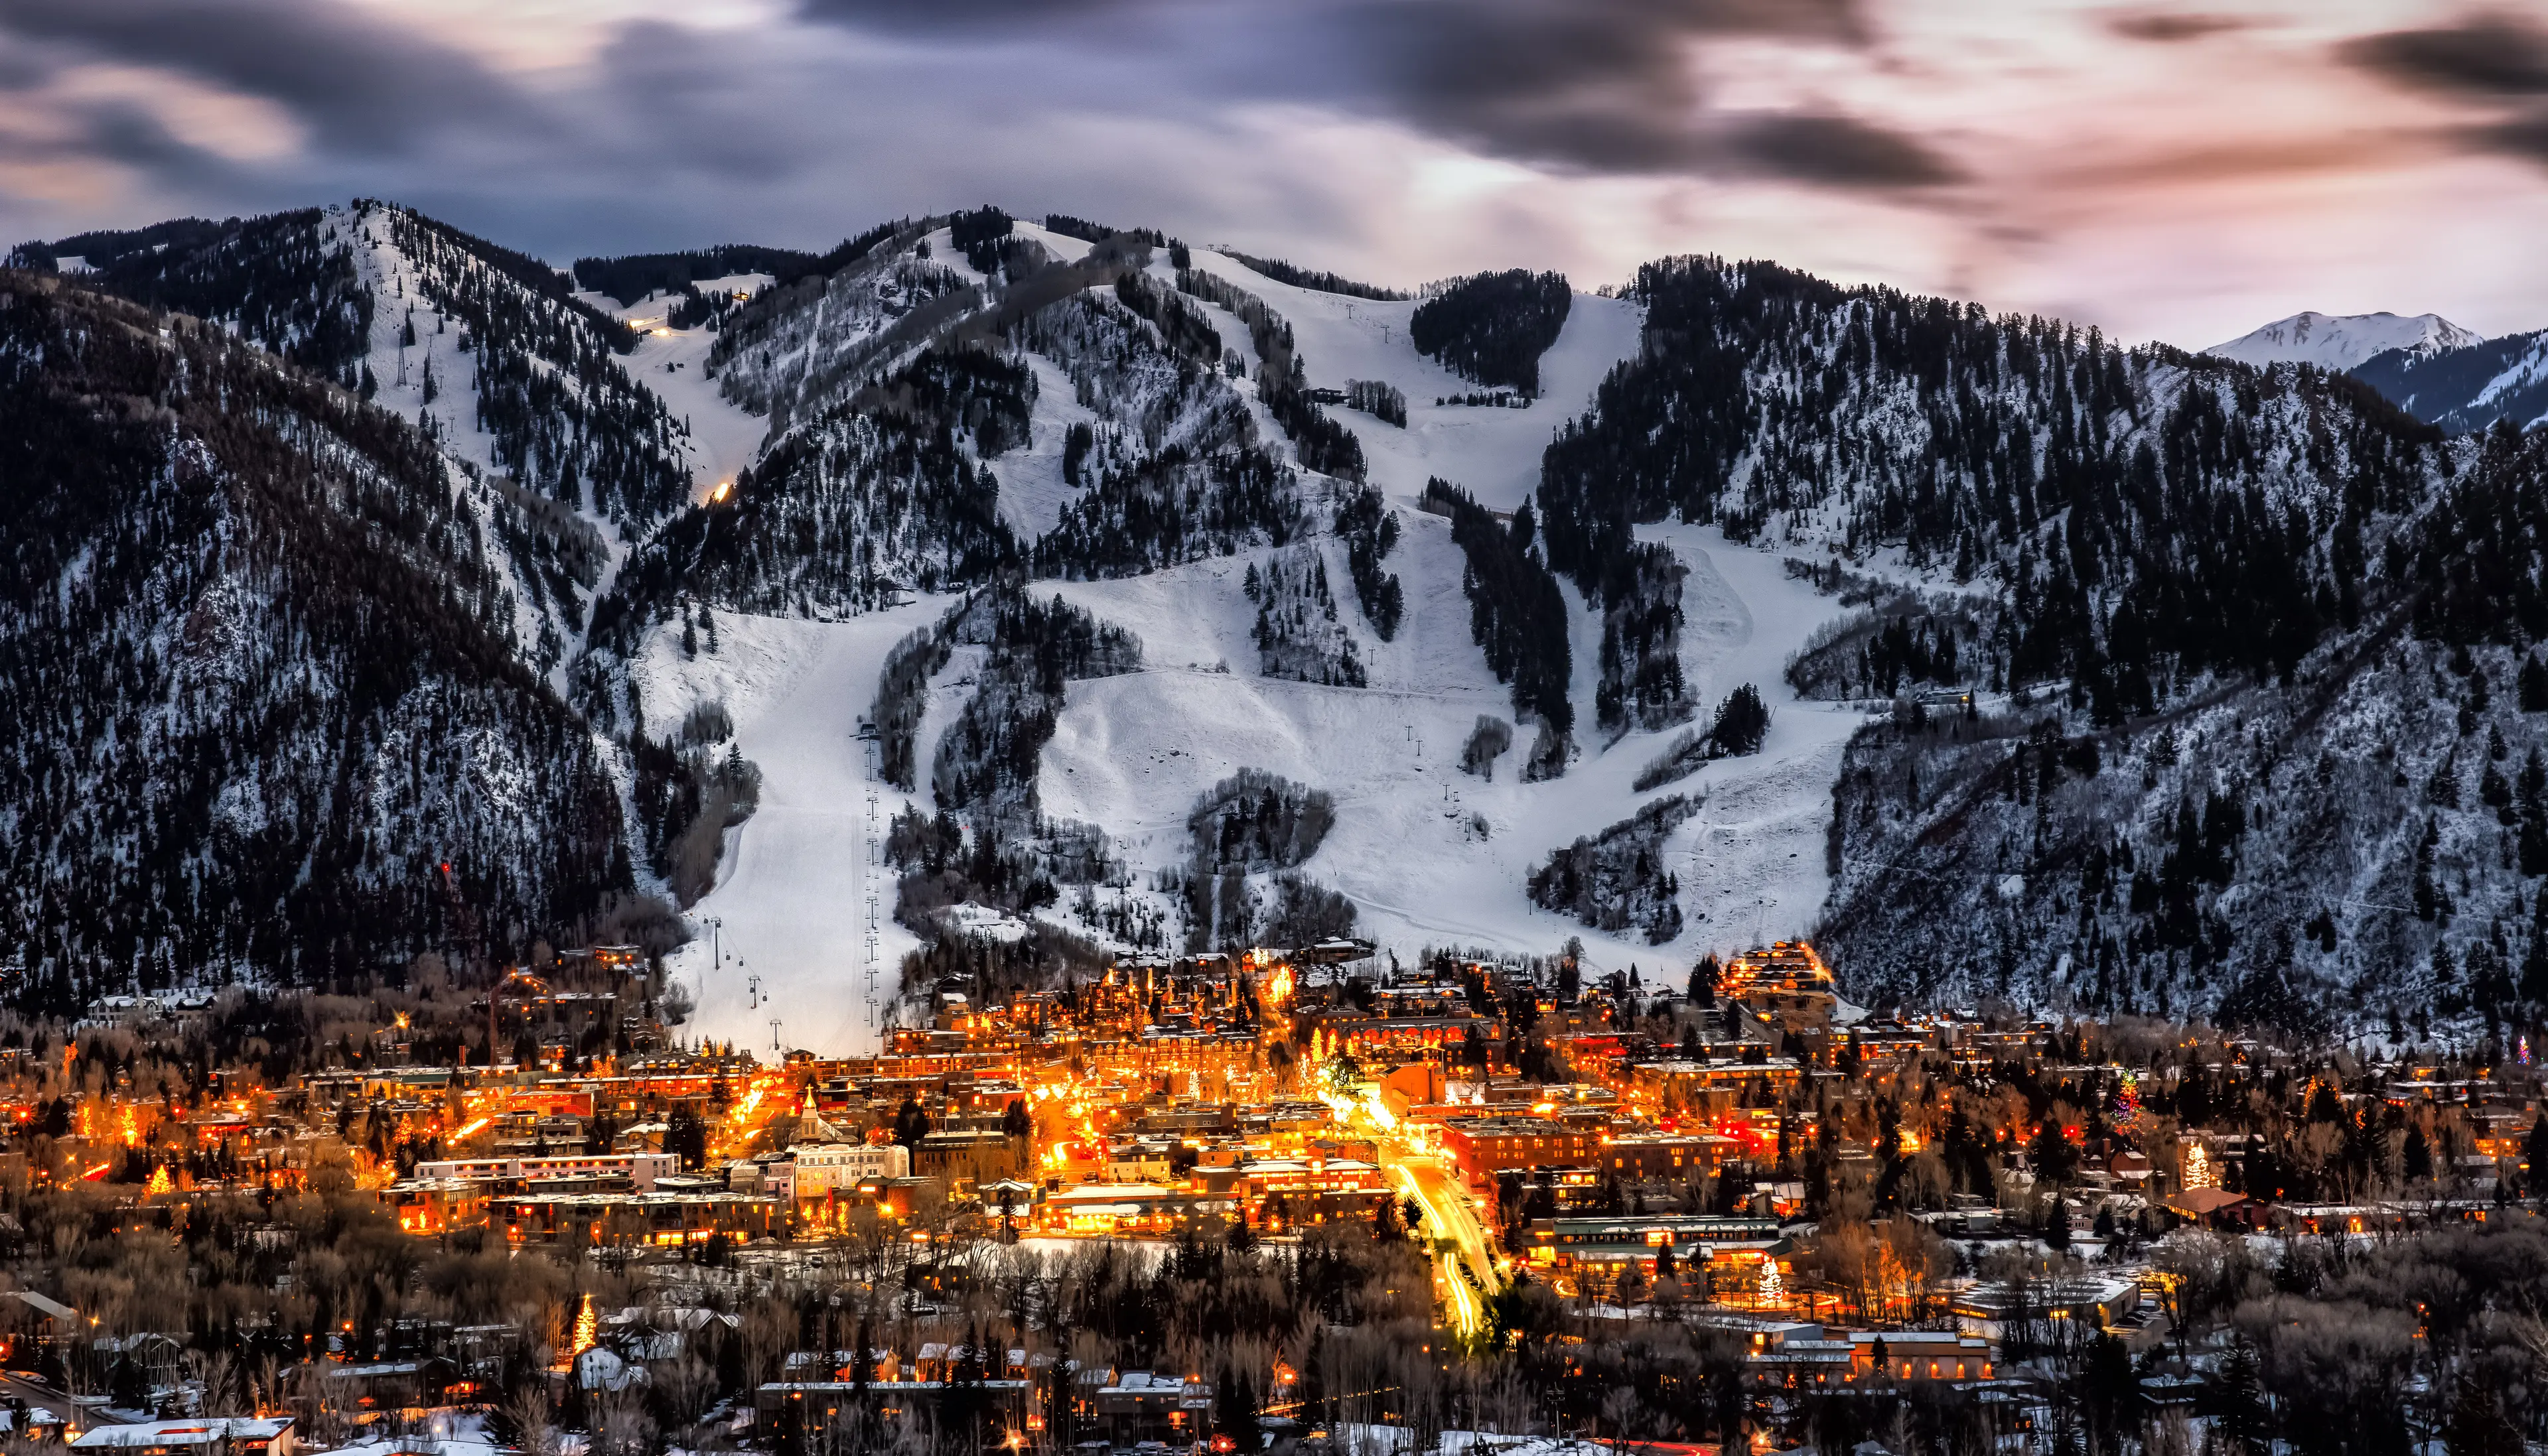 3-Day Aspen, Colorado Christmas Holiday Itinerary for Couples